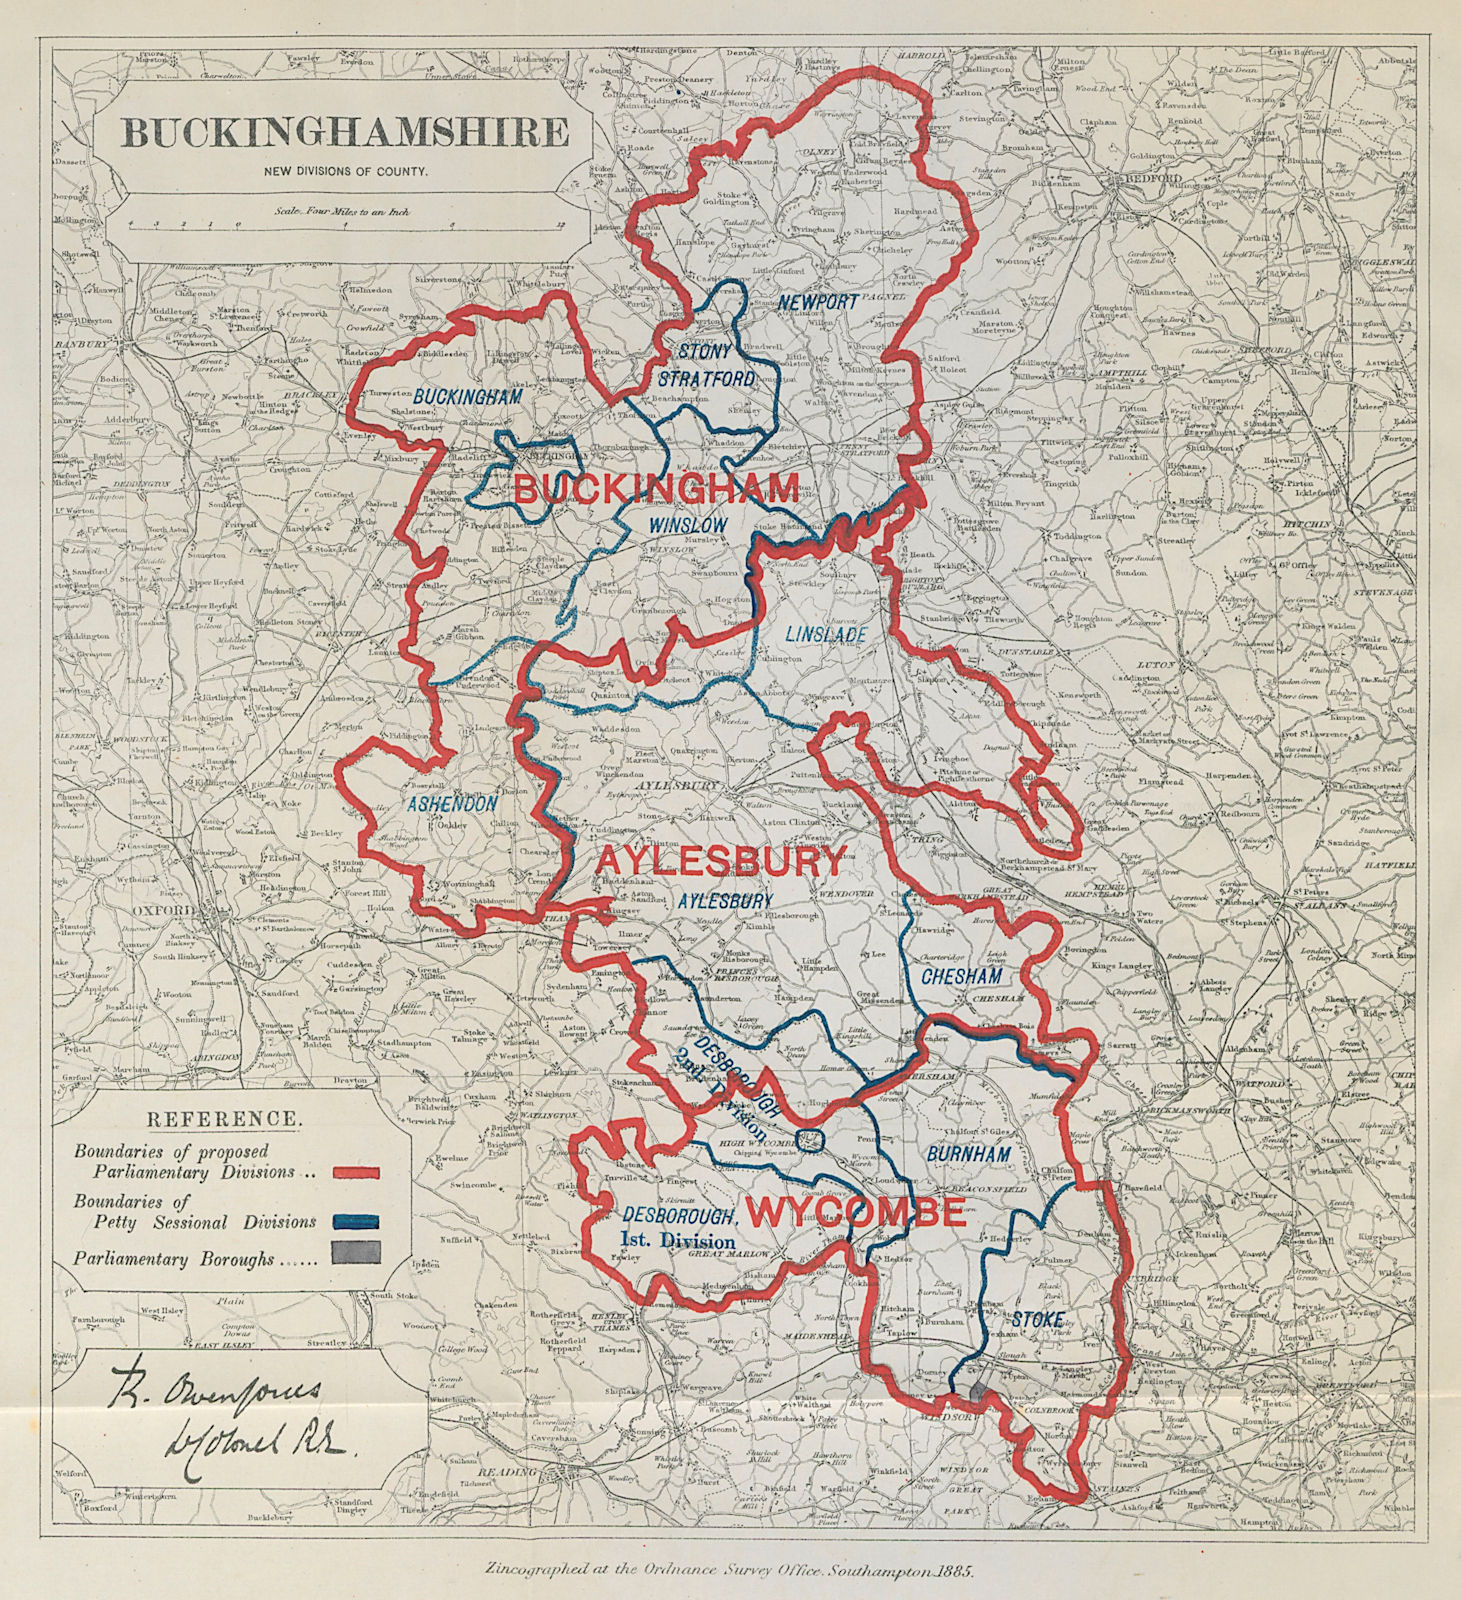 Associate Product Buckinghamshire Parliamentary Divisions. Wycombe. BOUNDARY COMMISSION 1885 map